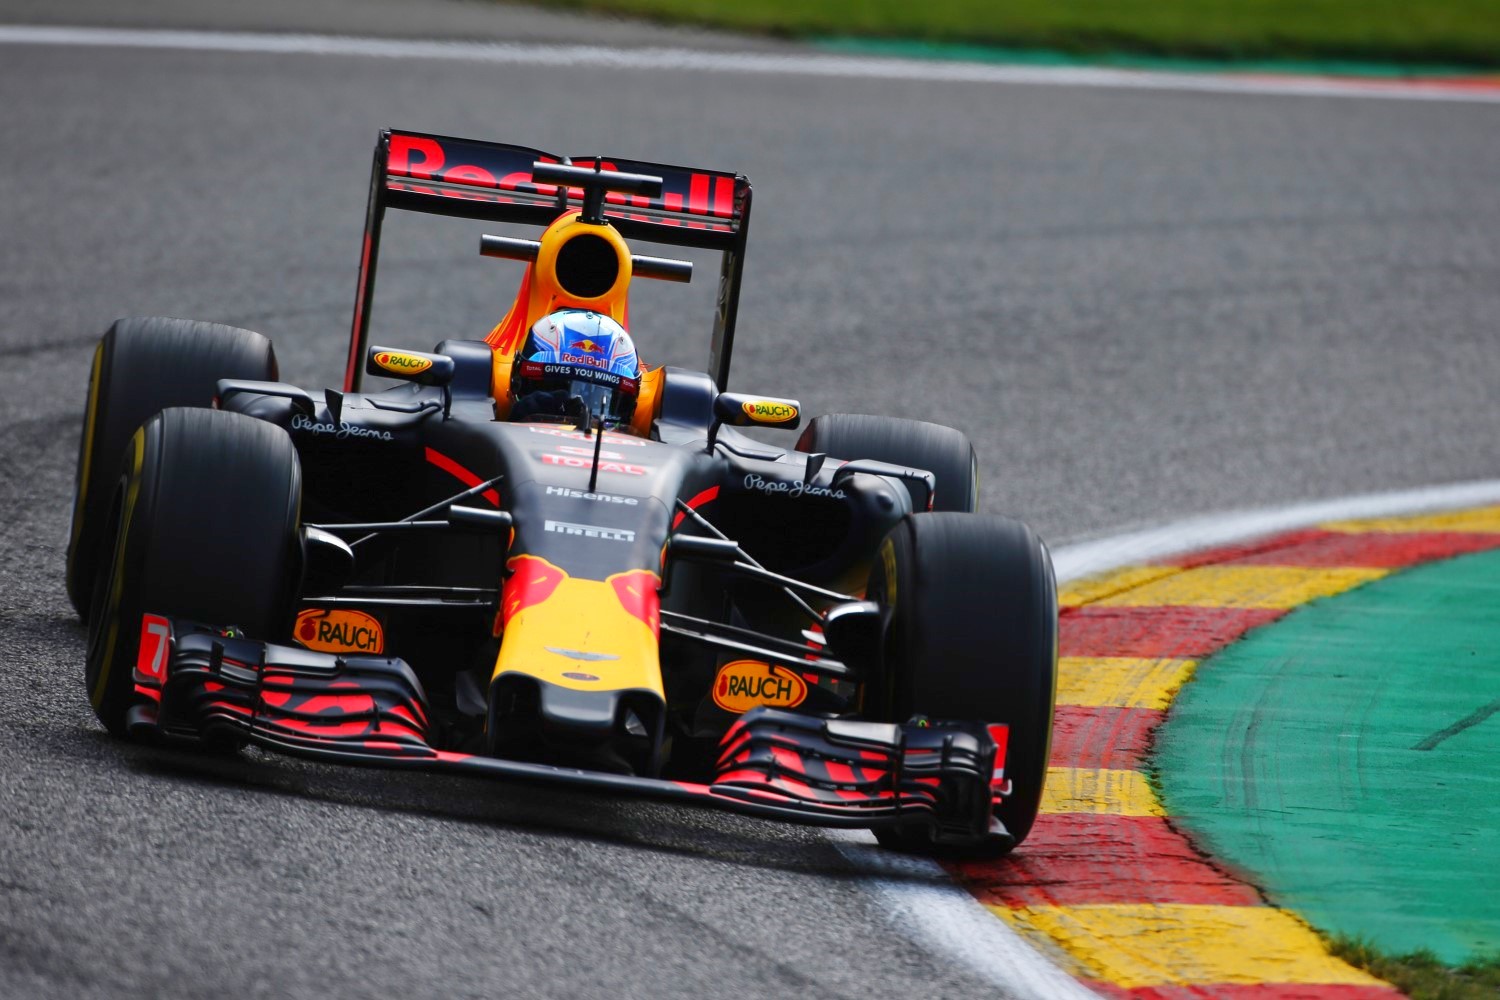 Was the Red Bull legal in Spa?